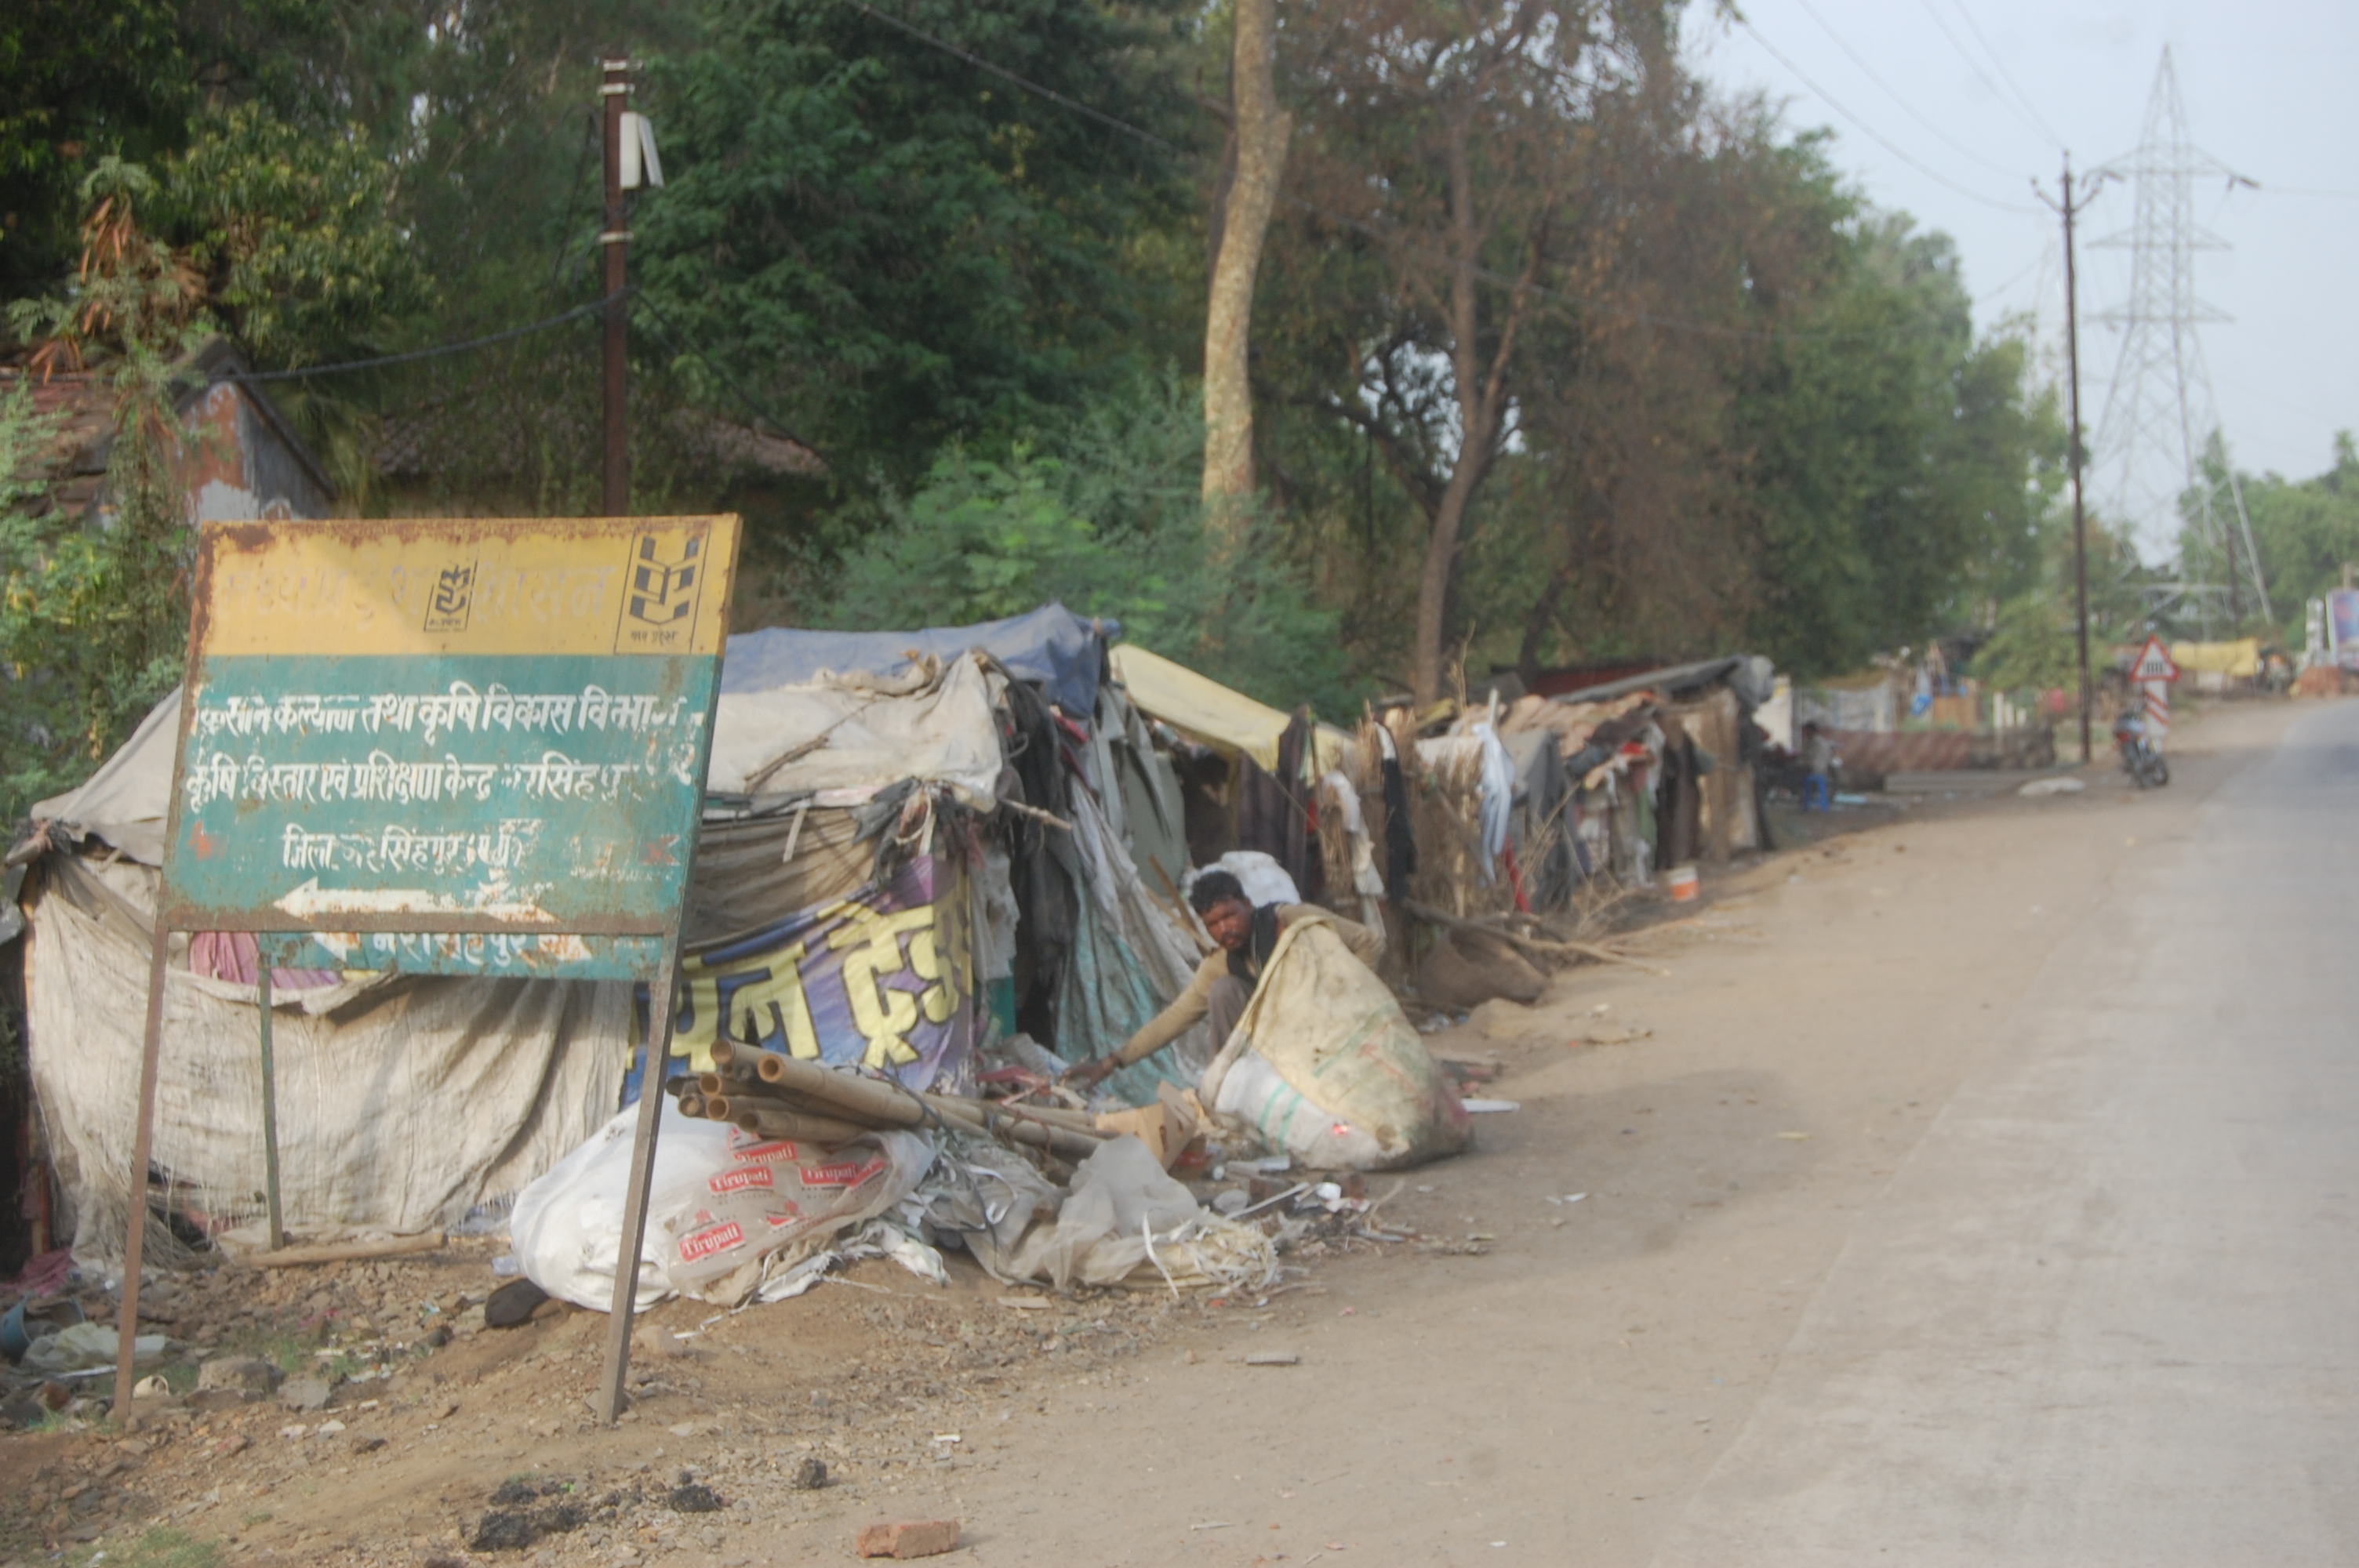 encroachment, the same conditions created due to apathy